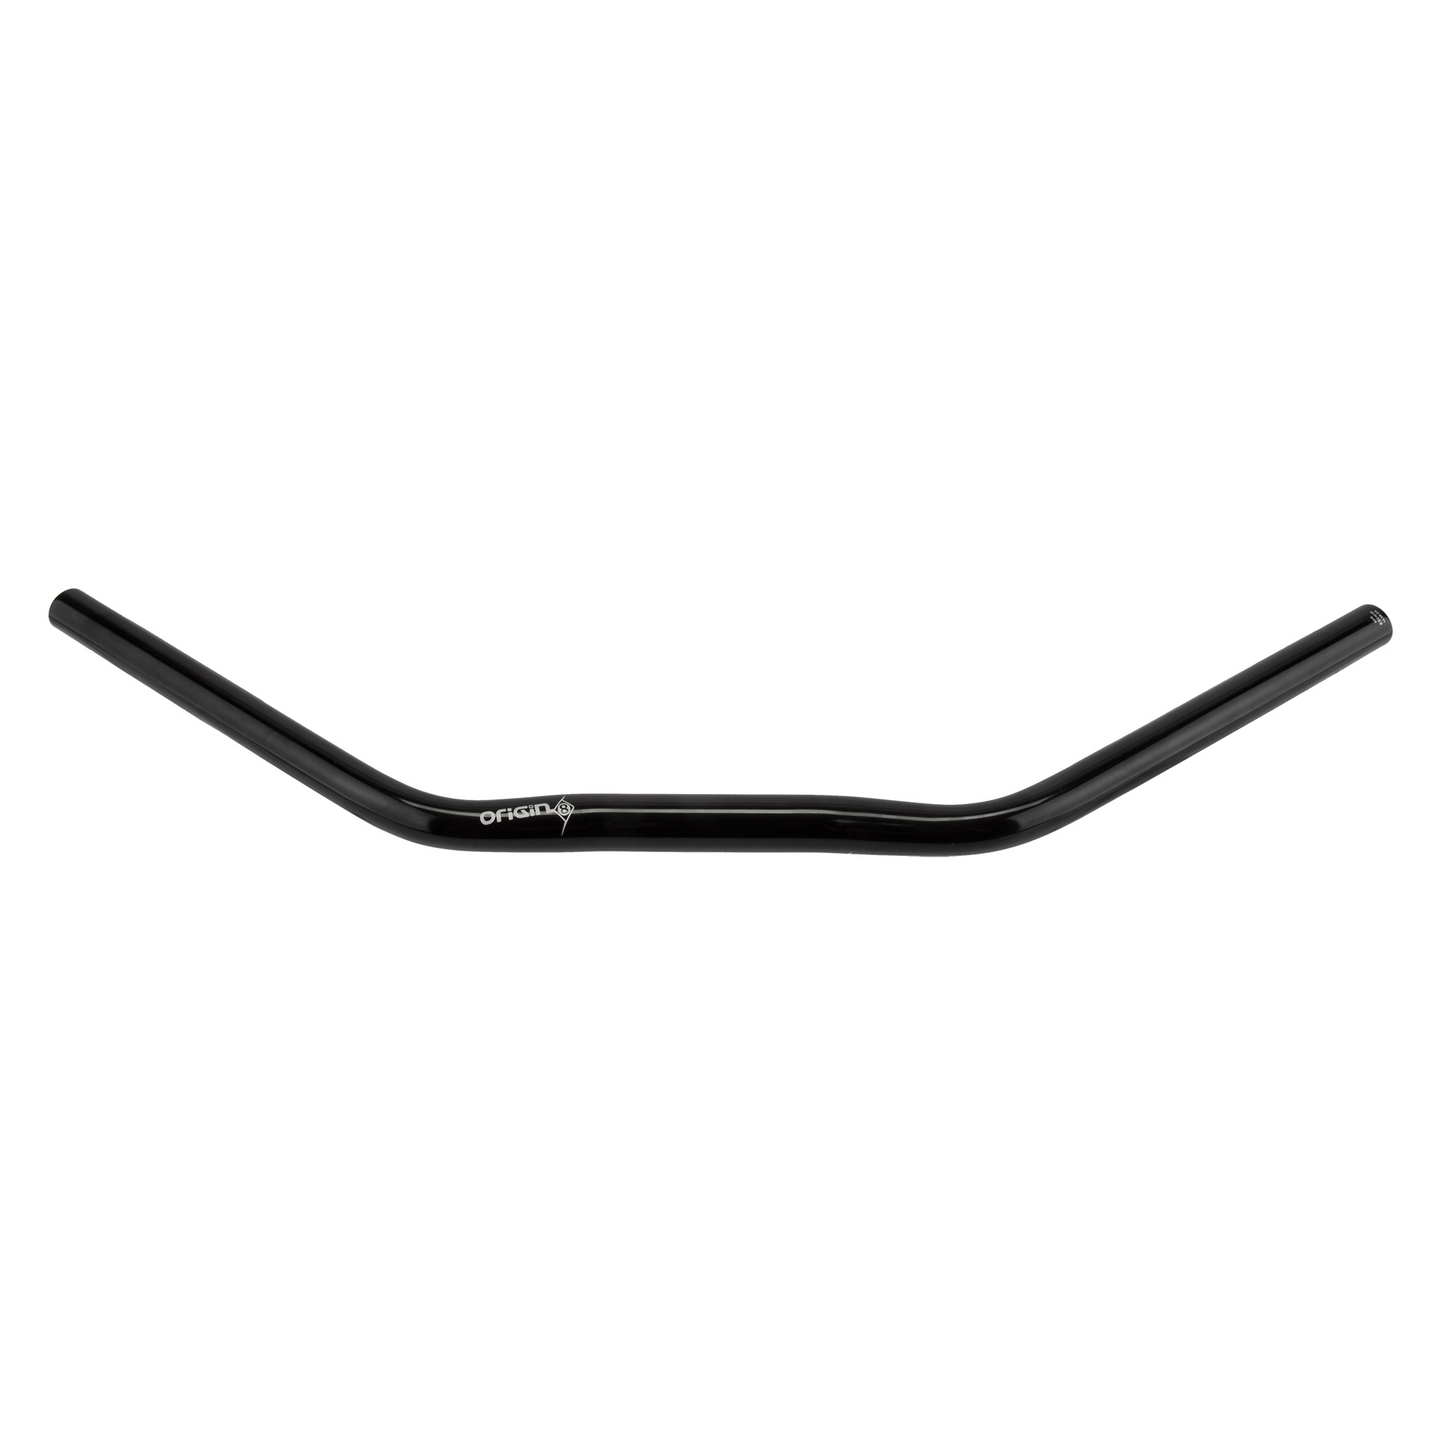 This black ORIGIN8 Handlebars - Transit Urban - Origin8, made from durable AL6061 alloy, features a wide grip and a slight rise in the middle for an ergonomic hand position. Perfect for an urban bar setup.